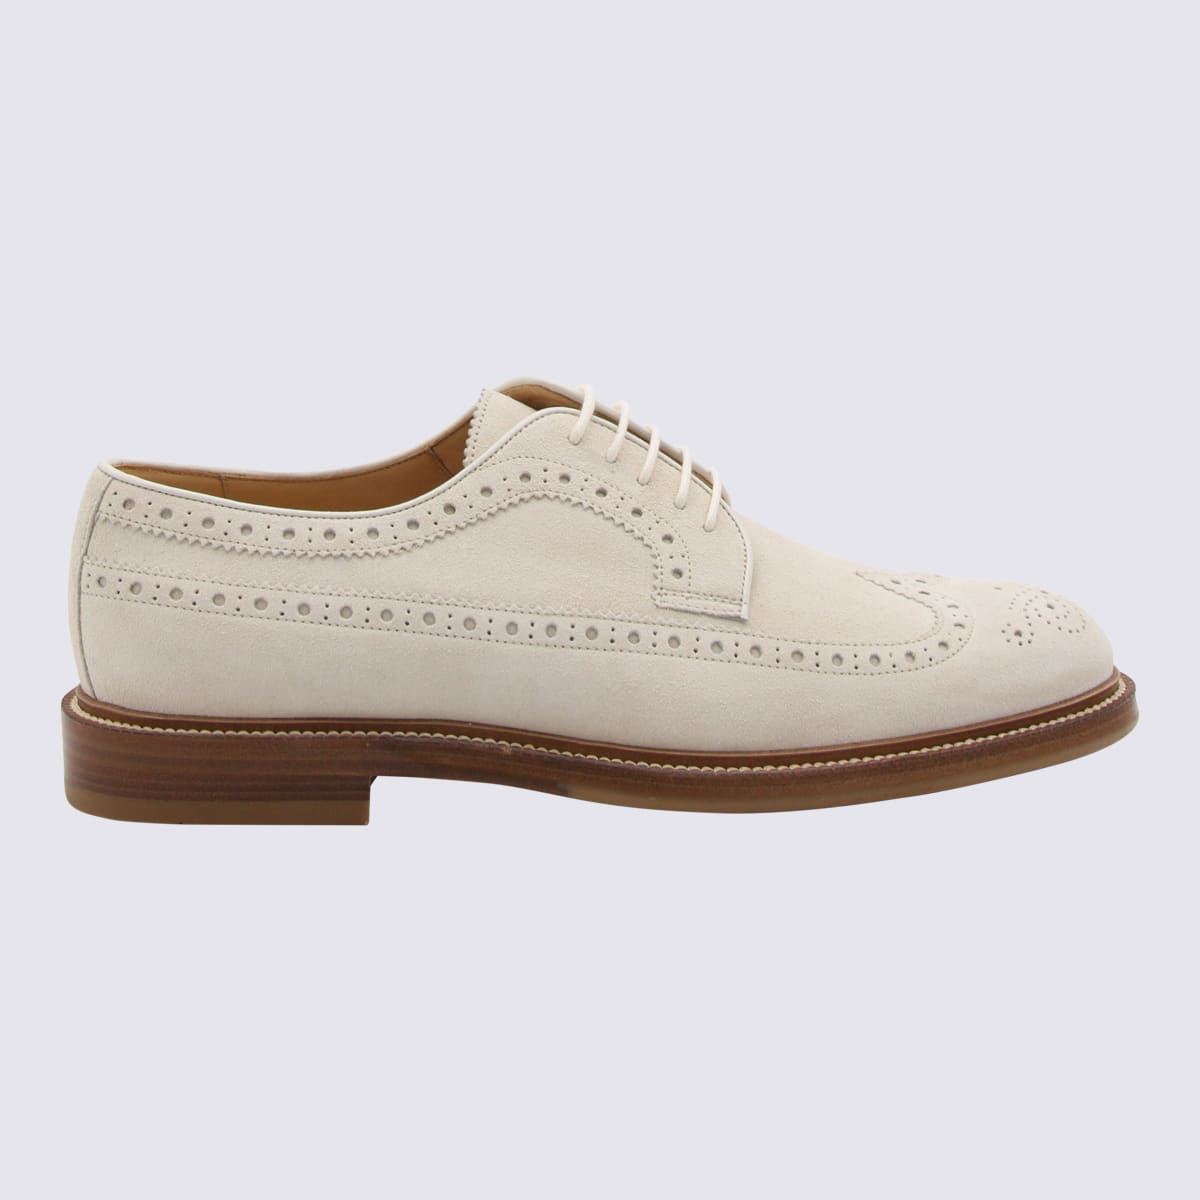 BRUNELLO CUCINELLI OFF WHITE LEATHER FORMAL SHOES